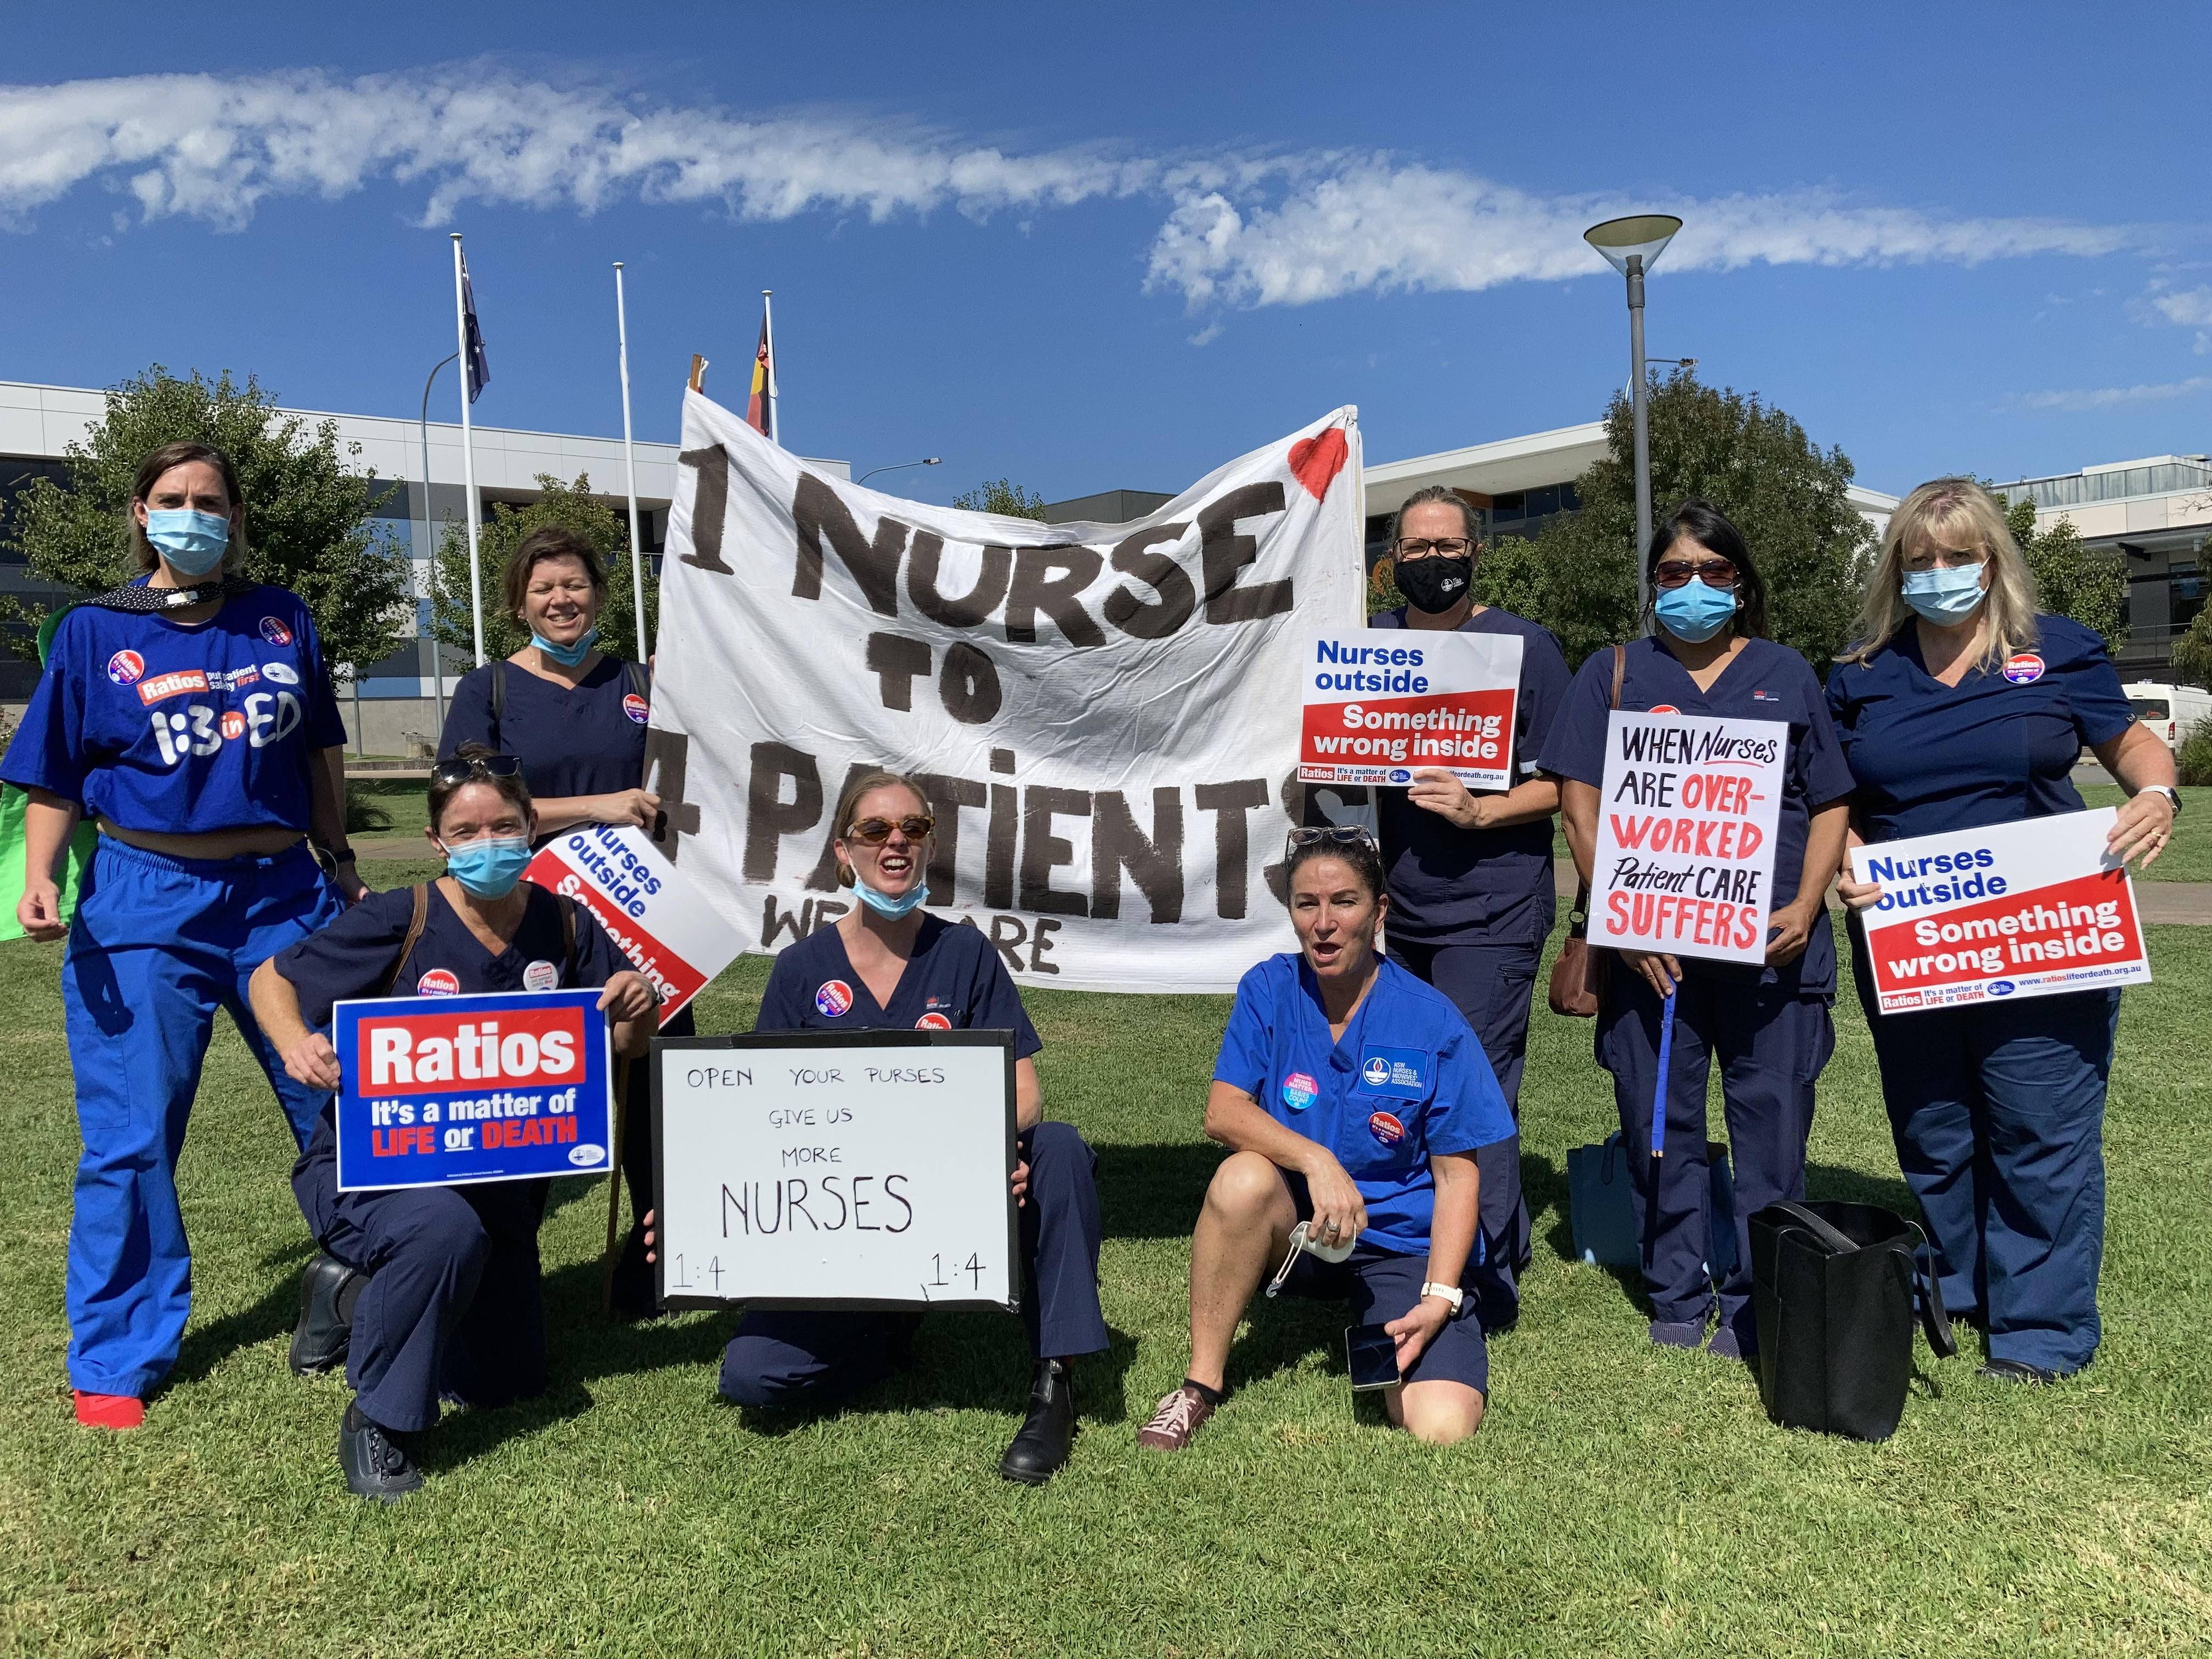 Batemans Bay rally: Exhausted southern region nurses to walk out for second time in six weeks